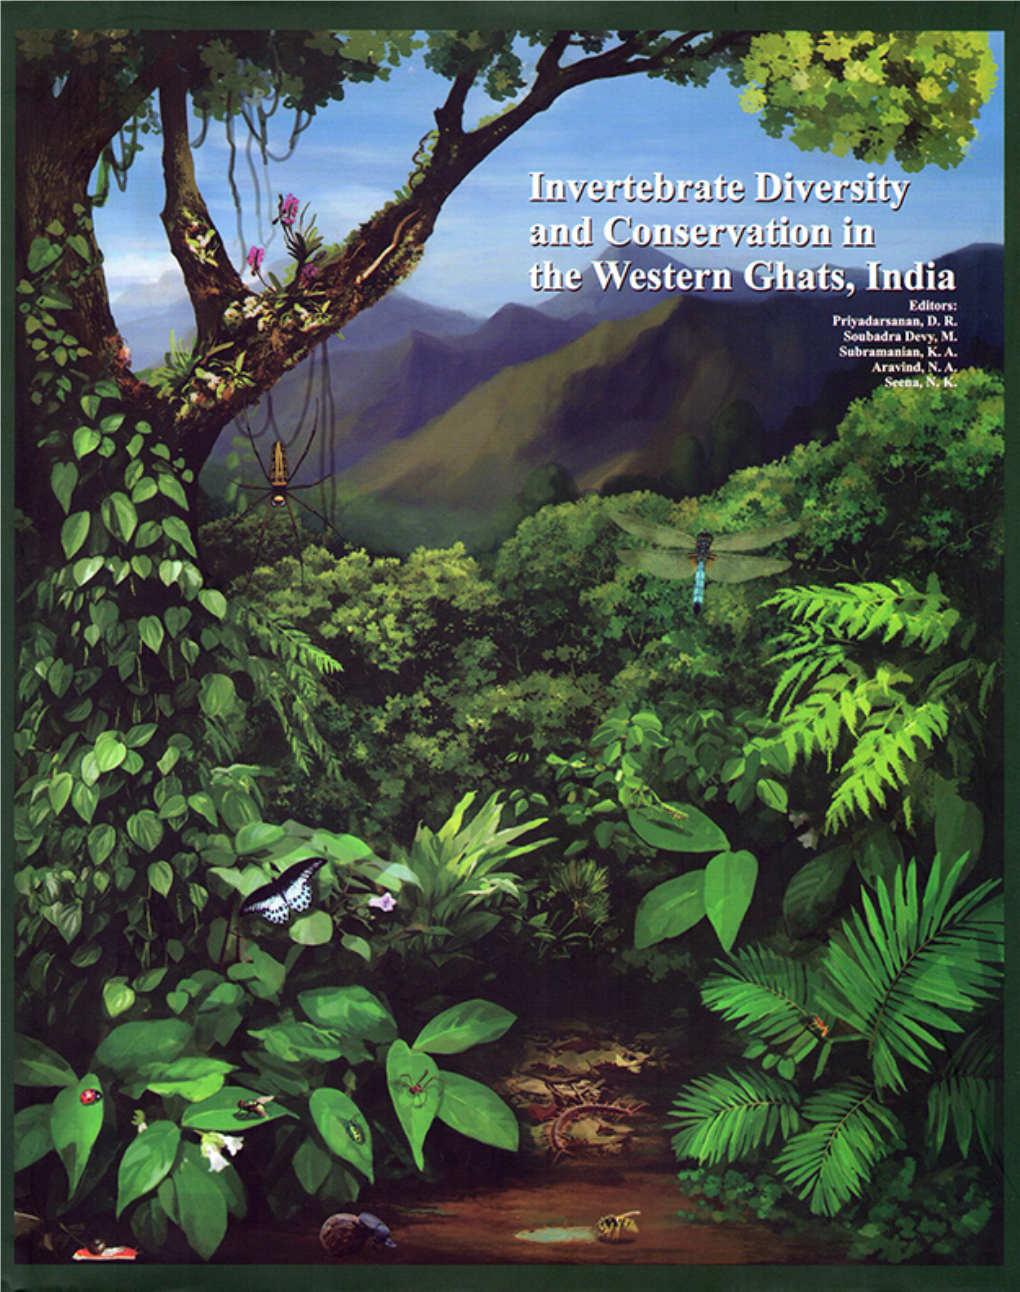 Invertebrate Diversity and Conservation in the Western Ghats, India